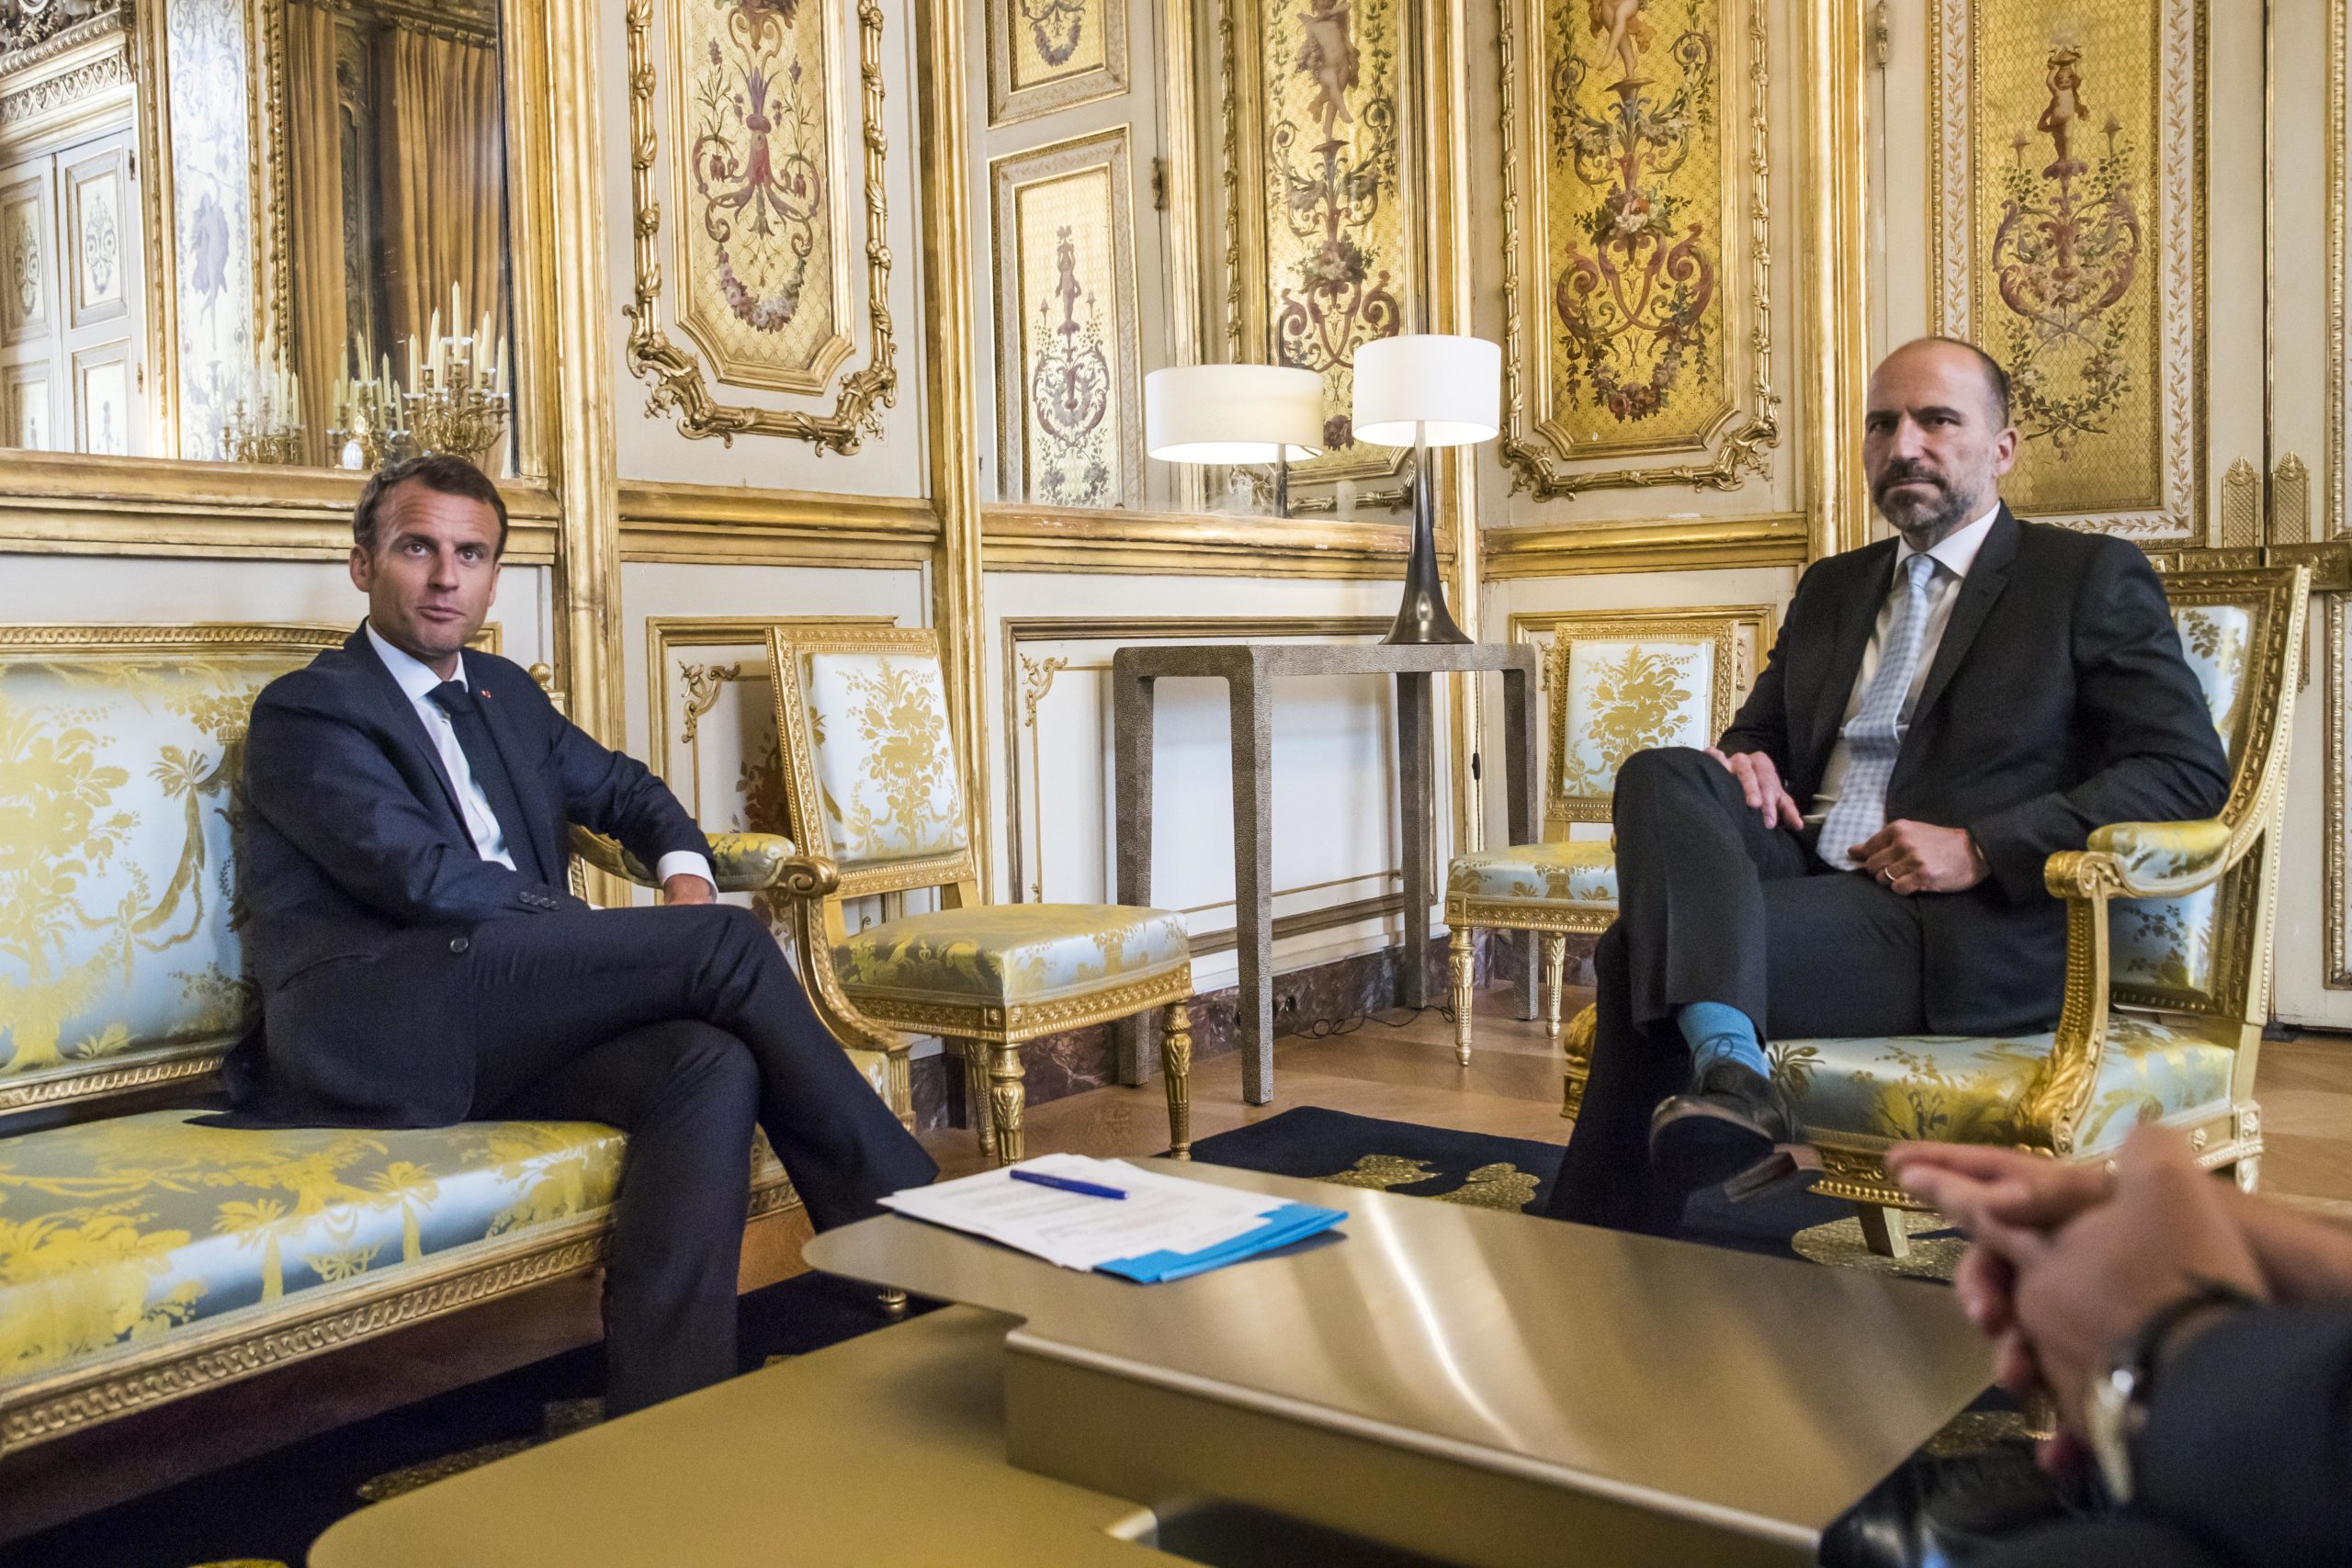 French President Emmanuel Macron (L) meets with Uber CEO Dara Khosrowshahi at the Elysee Palace in Paris, on May 23, 2018. (Photo by Christophe Petit-Tesson/AFP via Getty Images)